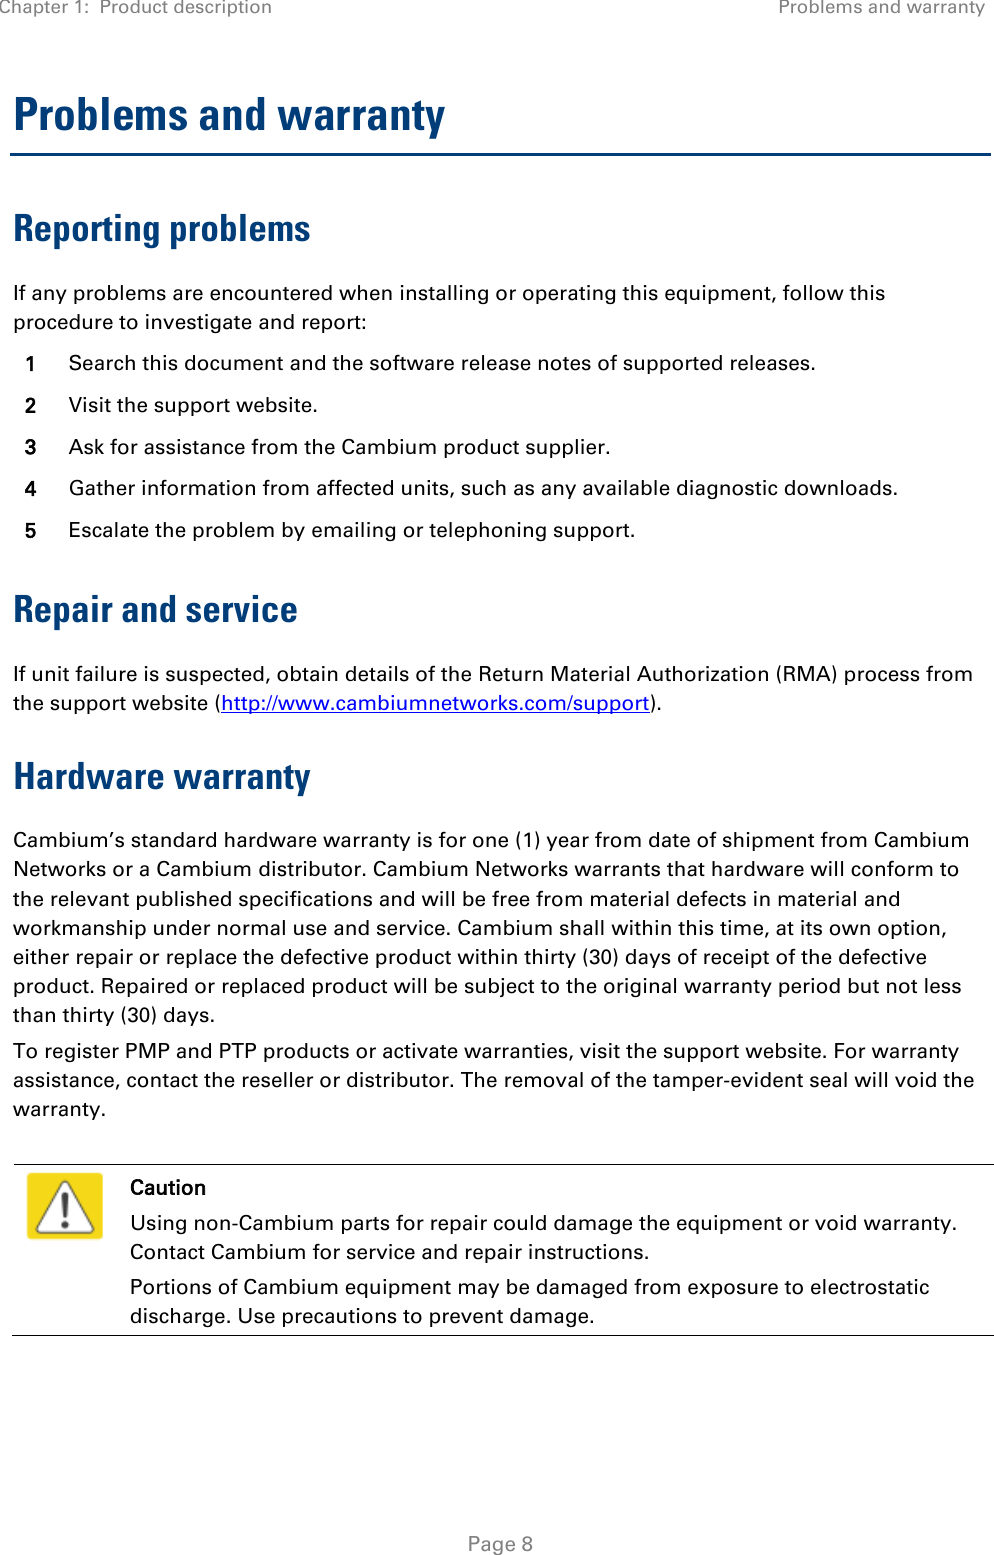 Chapter 1:  Product description Problems and warranty   Page 8 Problems and warranty Reporting problems If any problems are encountered when installing or operating this equipment, follow this procedure to investigate and report: 1 Search this document and the software release notes of supported releases. 2 Visit the support website. 3 Ask for assistance from the Cambium product supplier. 4 Gather information from affected units, such as any available diagnostic downloads. 5 Escalate the problem by emailing or telephoning support. Repair and service If unit failure is suspected, obtain details of the Return Material Authorization (RMA) process from the support website (http://www.cambiumnetworks.com/support). Hardware warranty Cambium’s standard hardware warranty is for one (1) year from date of shipment from Cambium Networks or a Cambium distributor. Cambium Networks warrants that hardware will conform to the relevant published specifications and will be free from material defects in material and workmanship under normal use and service. Cambium shall within this time, at its own option, either repair or replace the defective product within thirty (30) days of receipt of the defective product. Repaired or replaced product will be subject to the original warranty period but not less than thirty (30) days. To register PMP and PTP products or activate warranties, visit the support website. For warranty assistance, contact the reseller or distributor. The removal of the tamper-evident seal will void the warranty.   Caution Using non-Cambium parts for repair could damage the equipment or void warranty. Contact Cambium for service and repair instructions. Portions of Cambium equipment may be damaged from exposure to electrostatic discharge. Use precautions to prevent damage.  